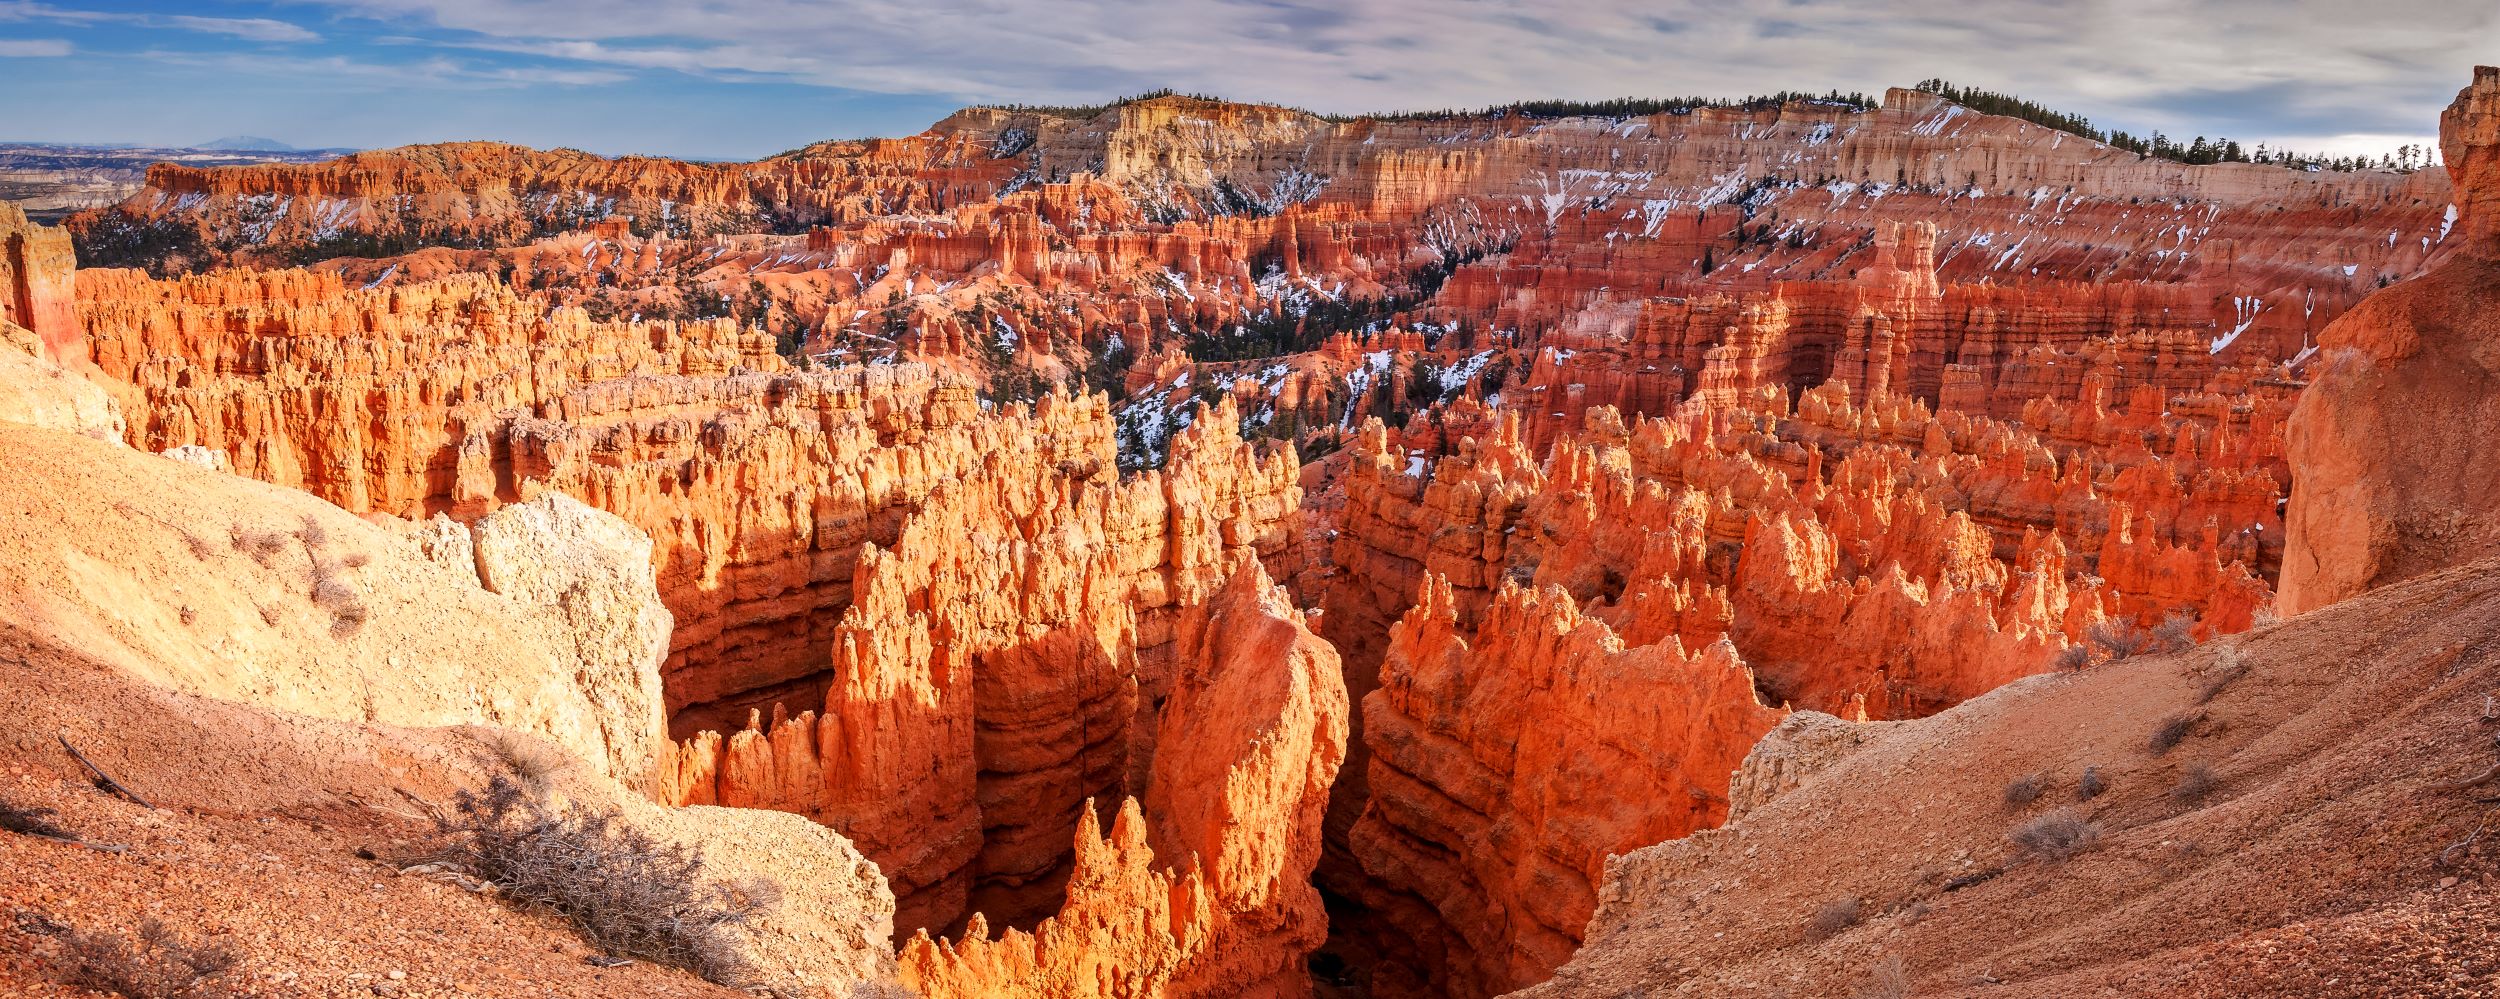 A view of Bryce Canyon.